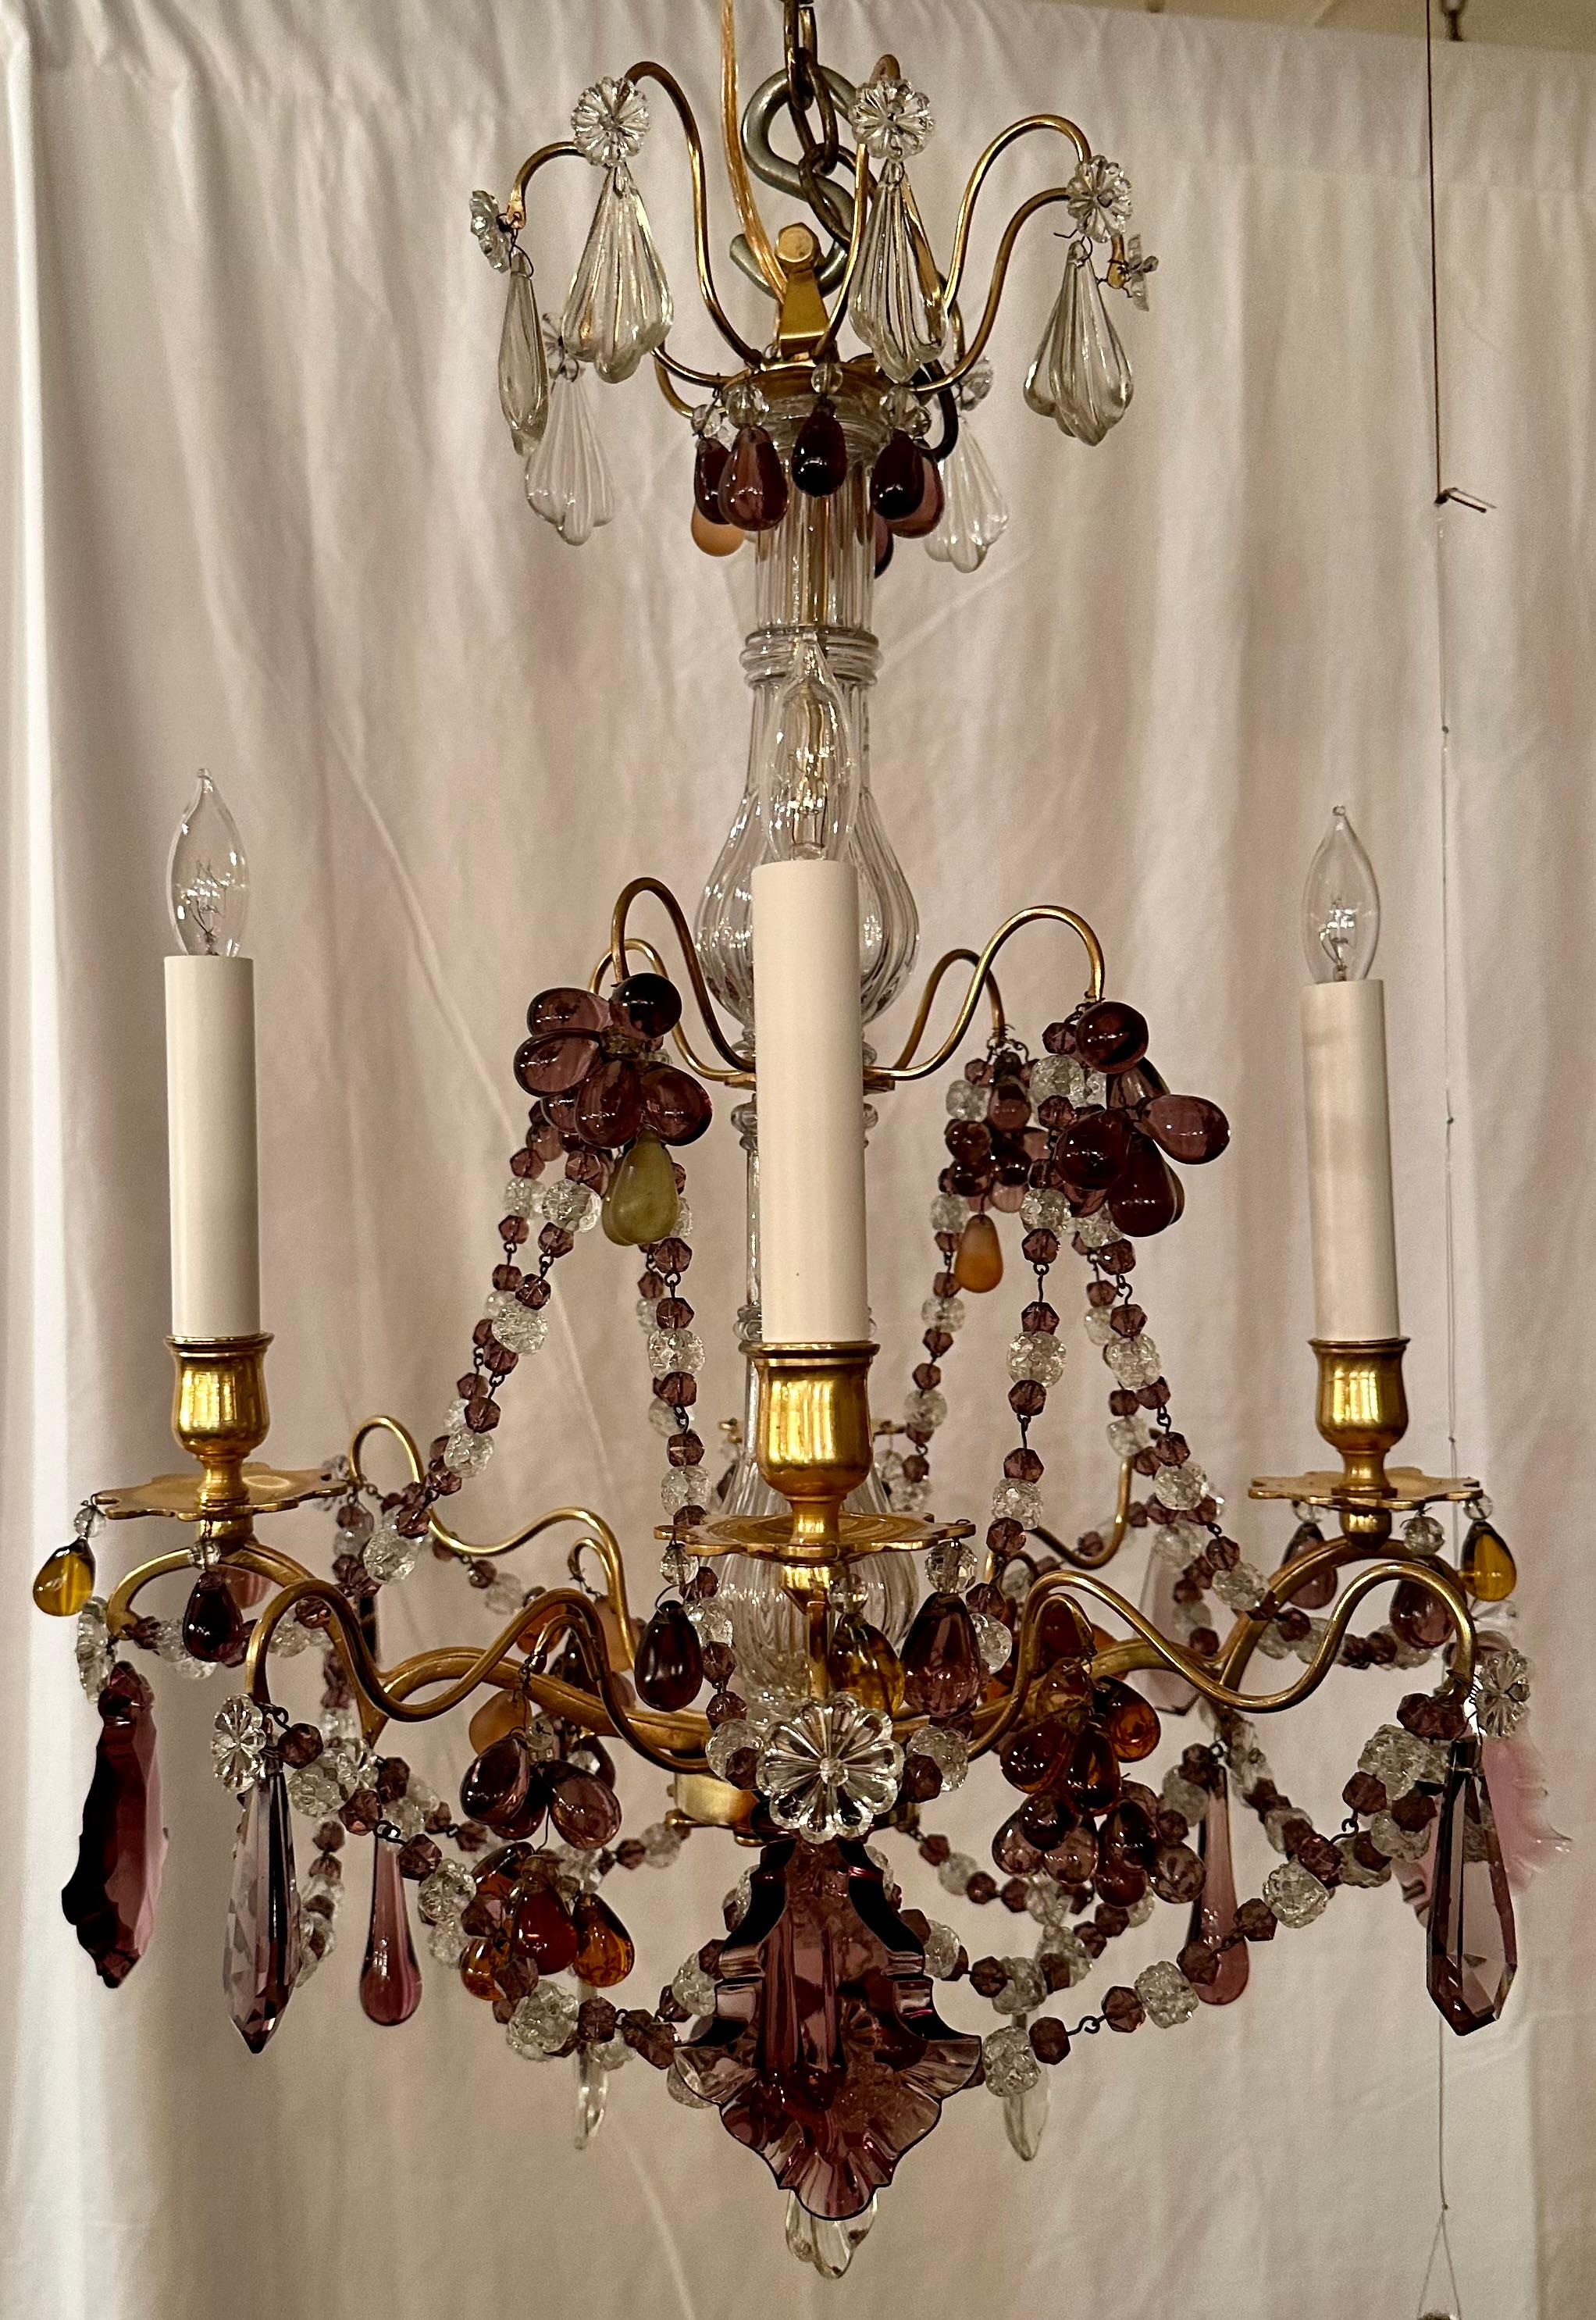 Antique French Gold Bronze and Crystal Beaded Chandelier, Circa 1890-1910.
Lovely draping with both clear and multicolored prisms and beads.